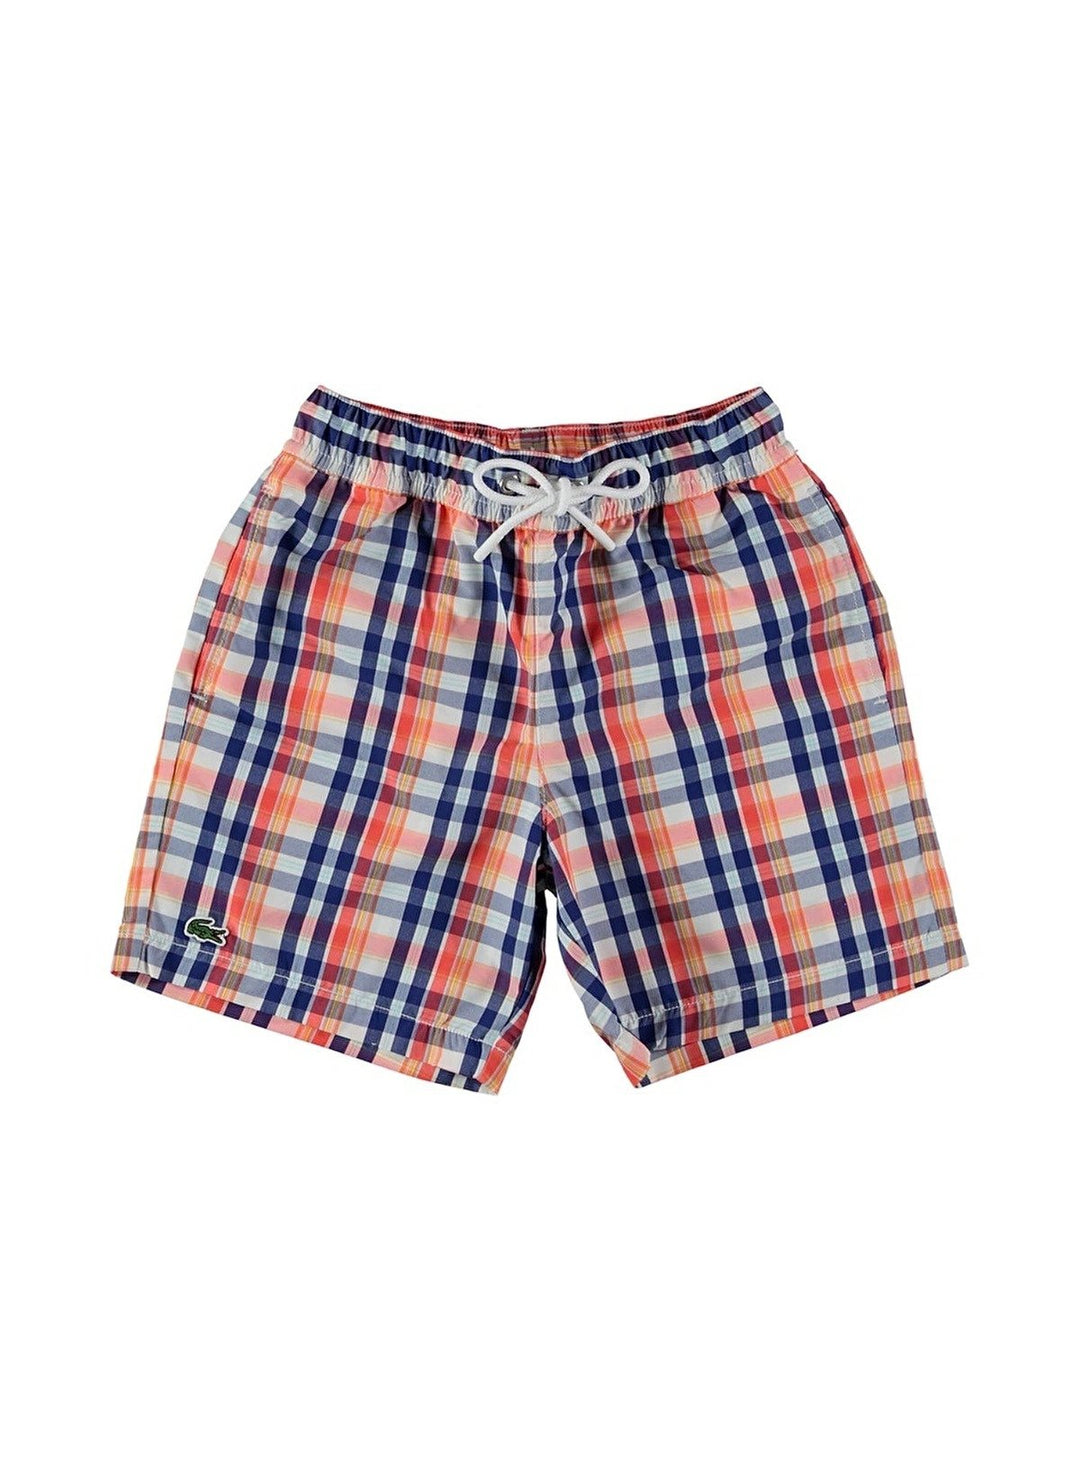 Shop The Latest Collection Of Outlet - Lacoste Kids' Check Swim Shorts - Mj6194 In Lebanon